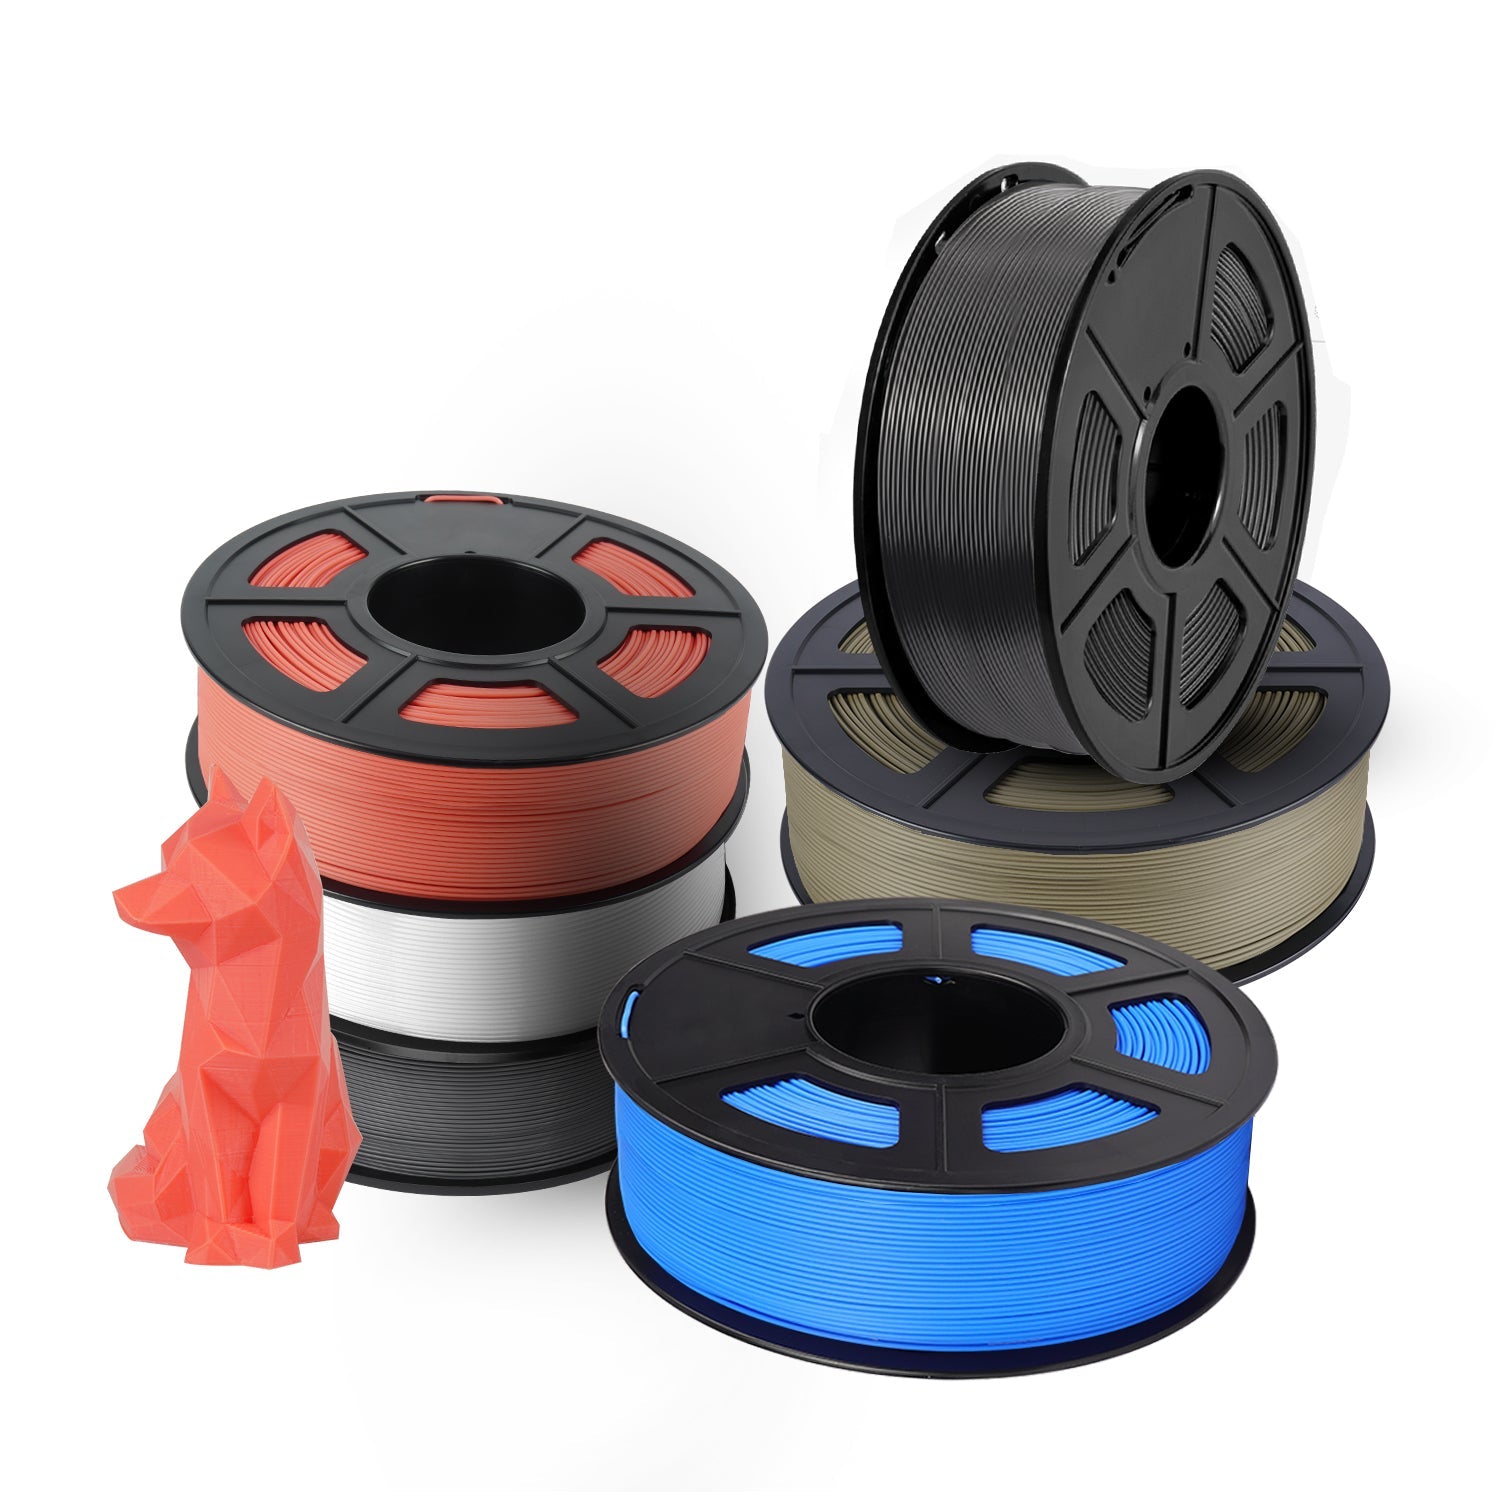 SUNLU ABS Filament 1.75mm, Low Printing Temperature ABS 3D Printer  Filament, Not Required 3D Printer Enclosure or Filament Dryer, Neatly Wound  3D